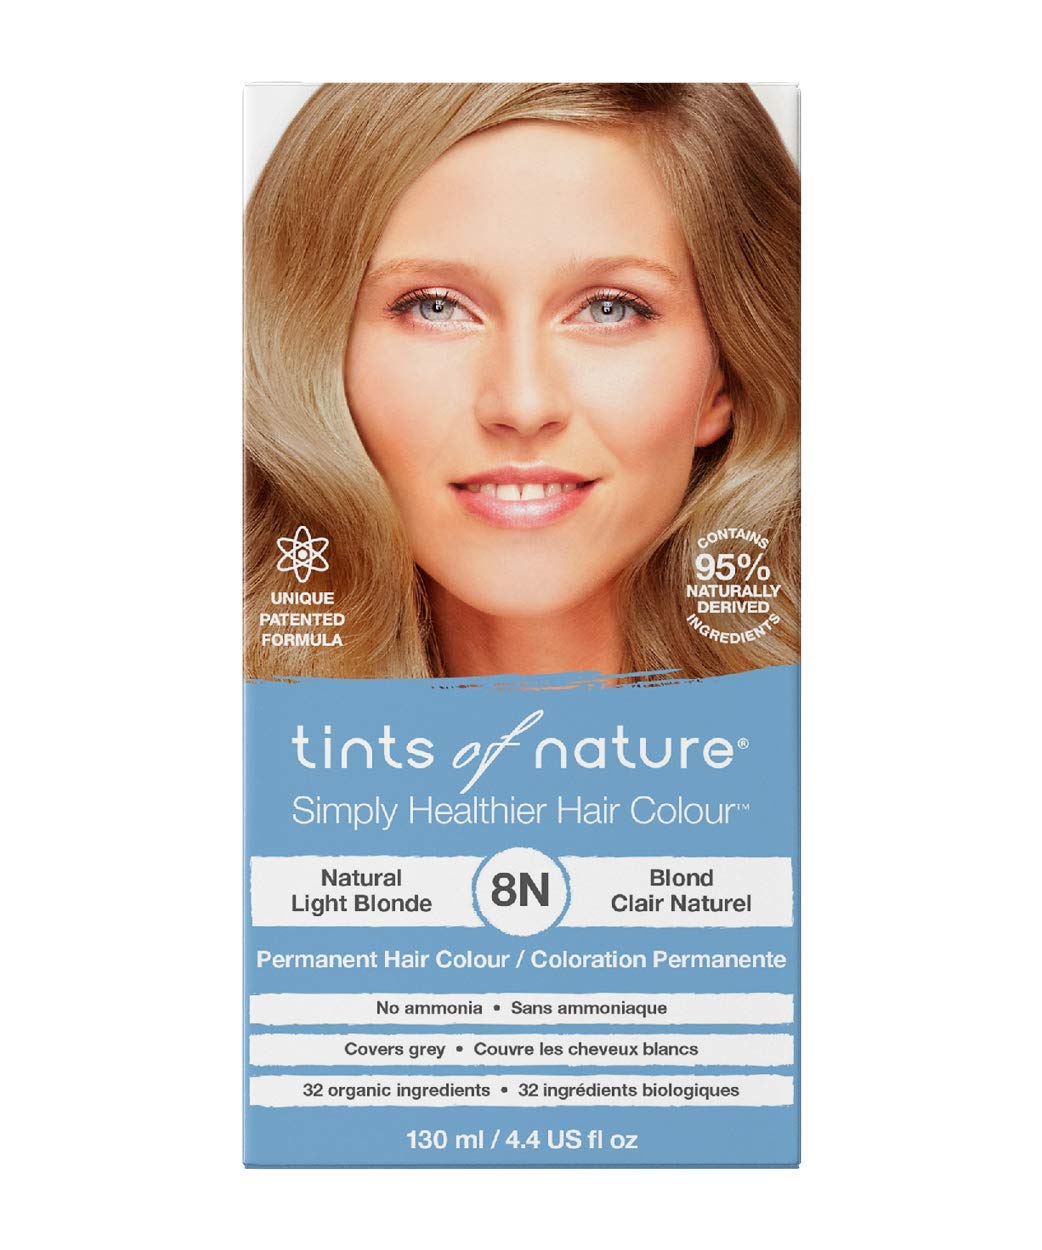 Tints of Nature Natural Light Blonde Permanent Hair Dye 8N Nourishes Hair & Covers Greys - Single Pack, (8n) ‎light